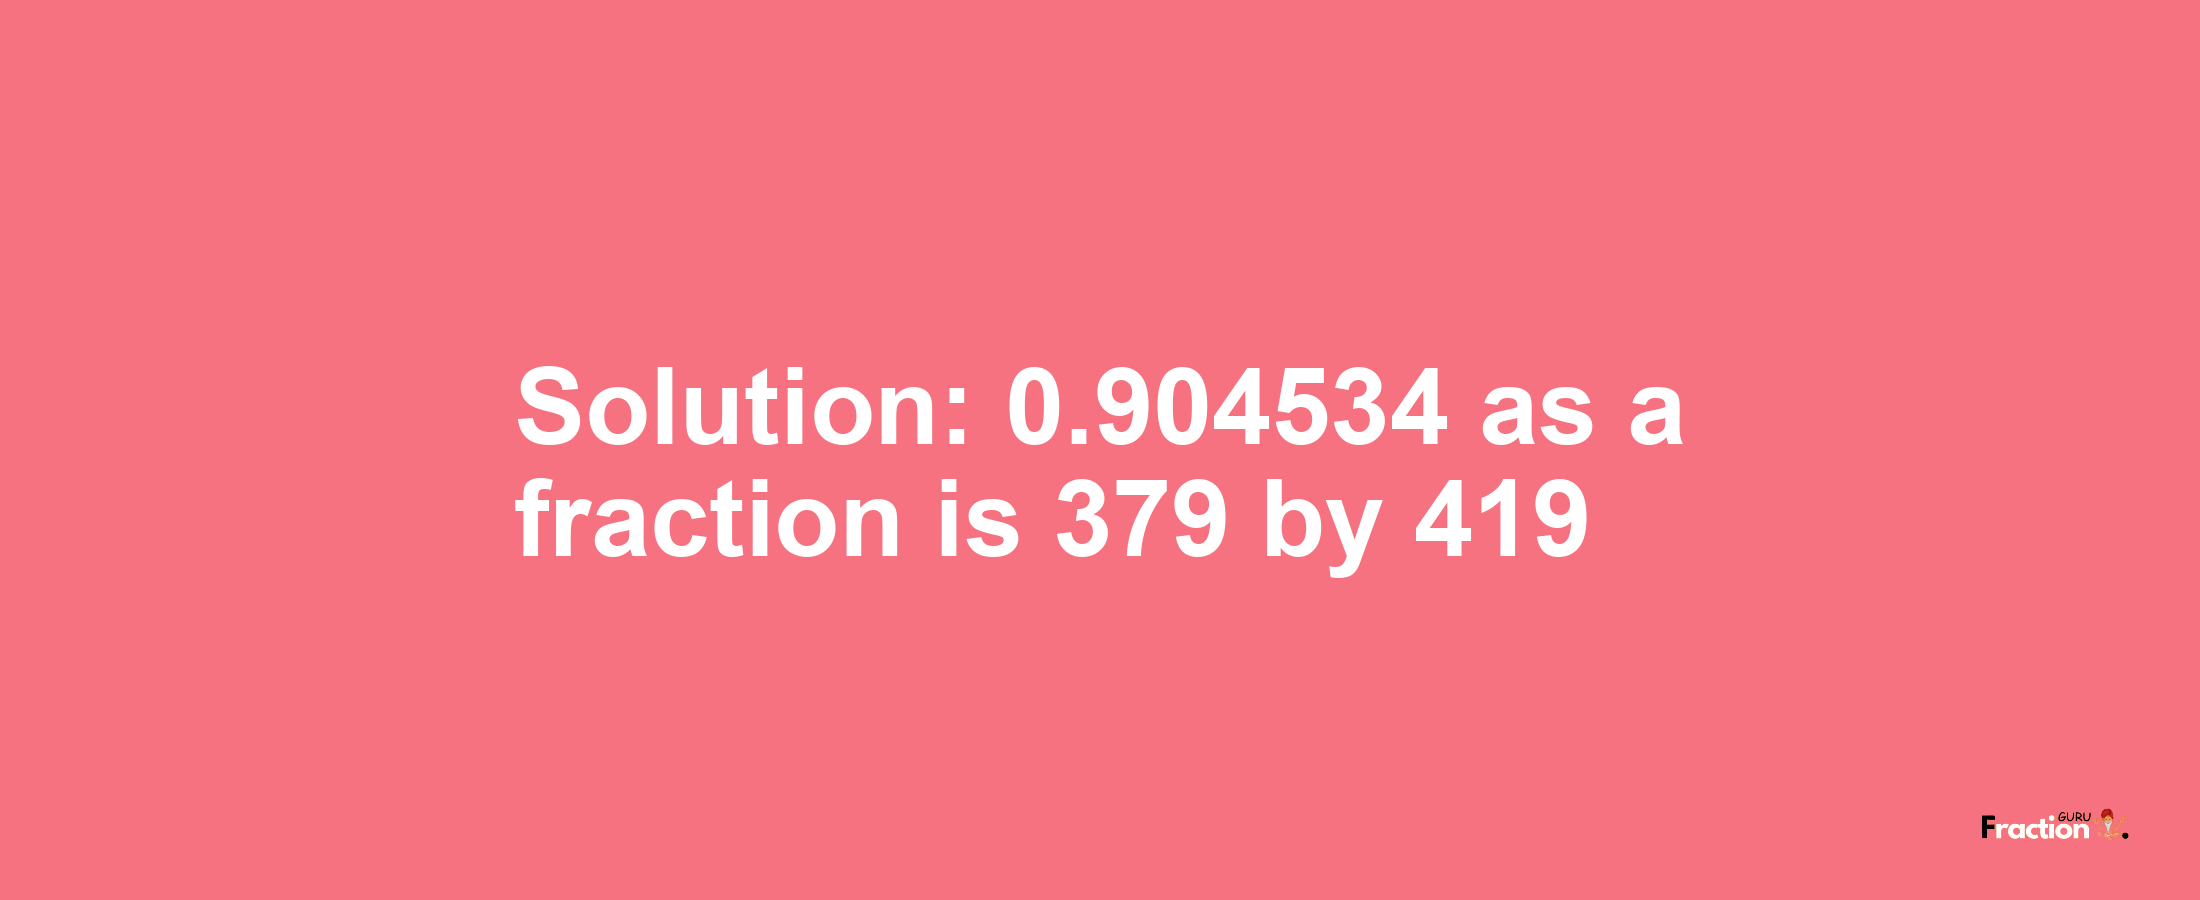 Solution:0.904534 as a fraction is 379/419